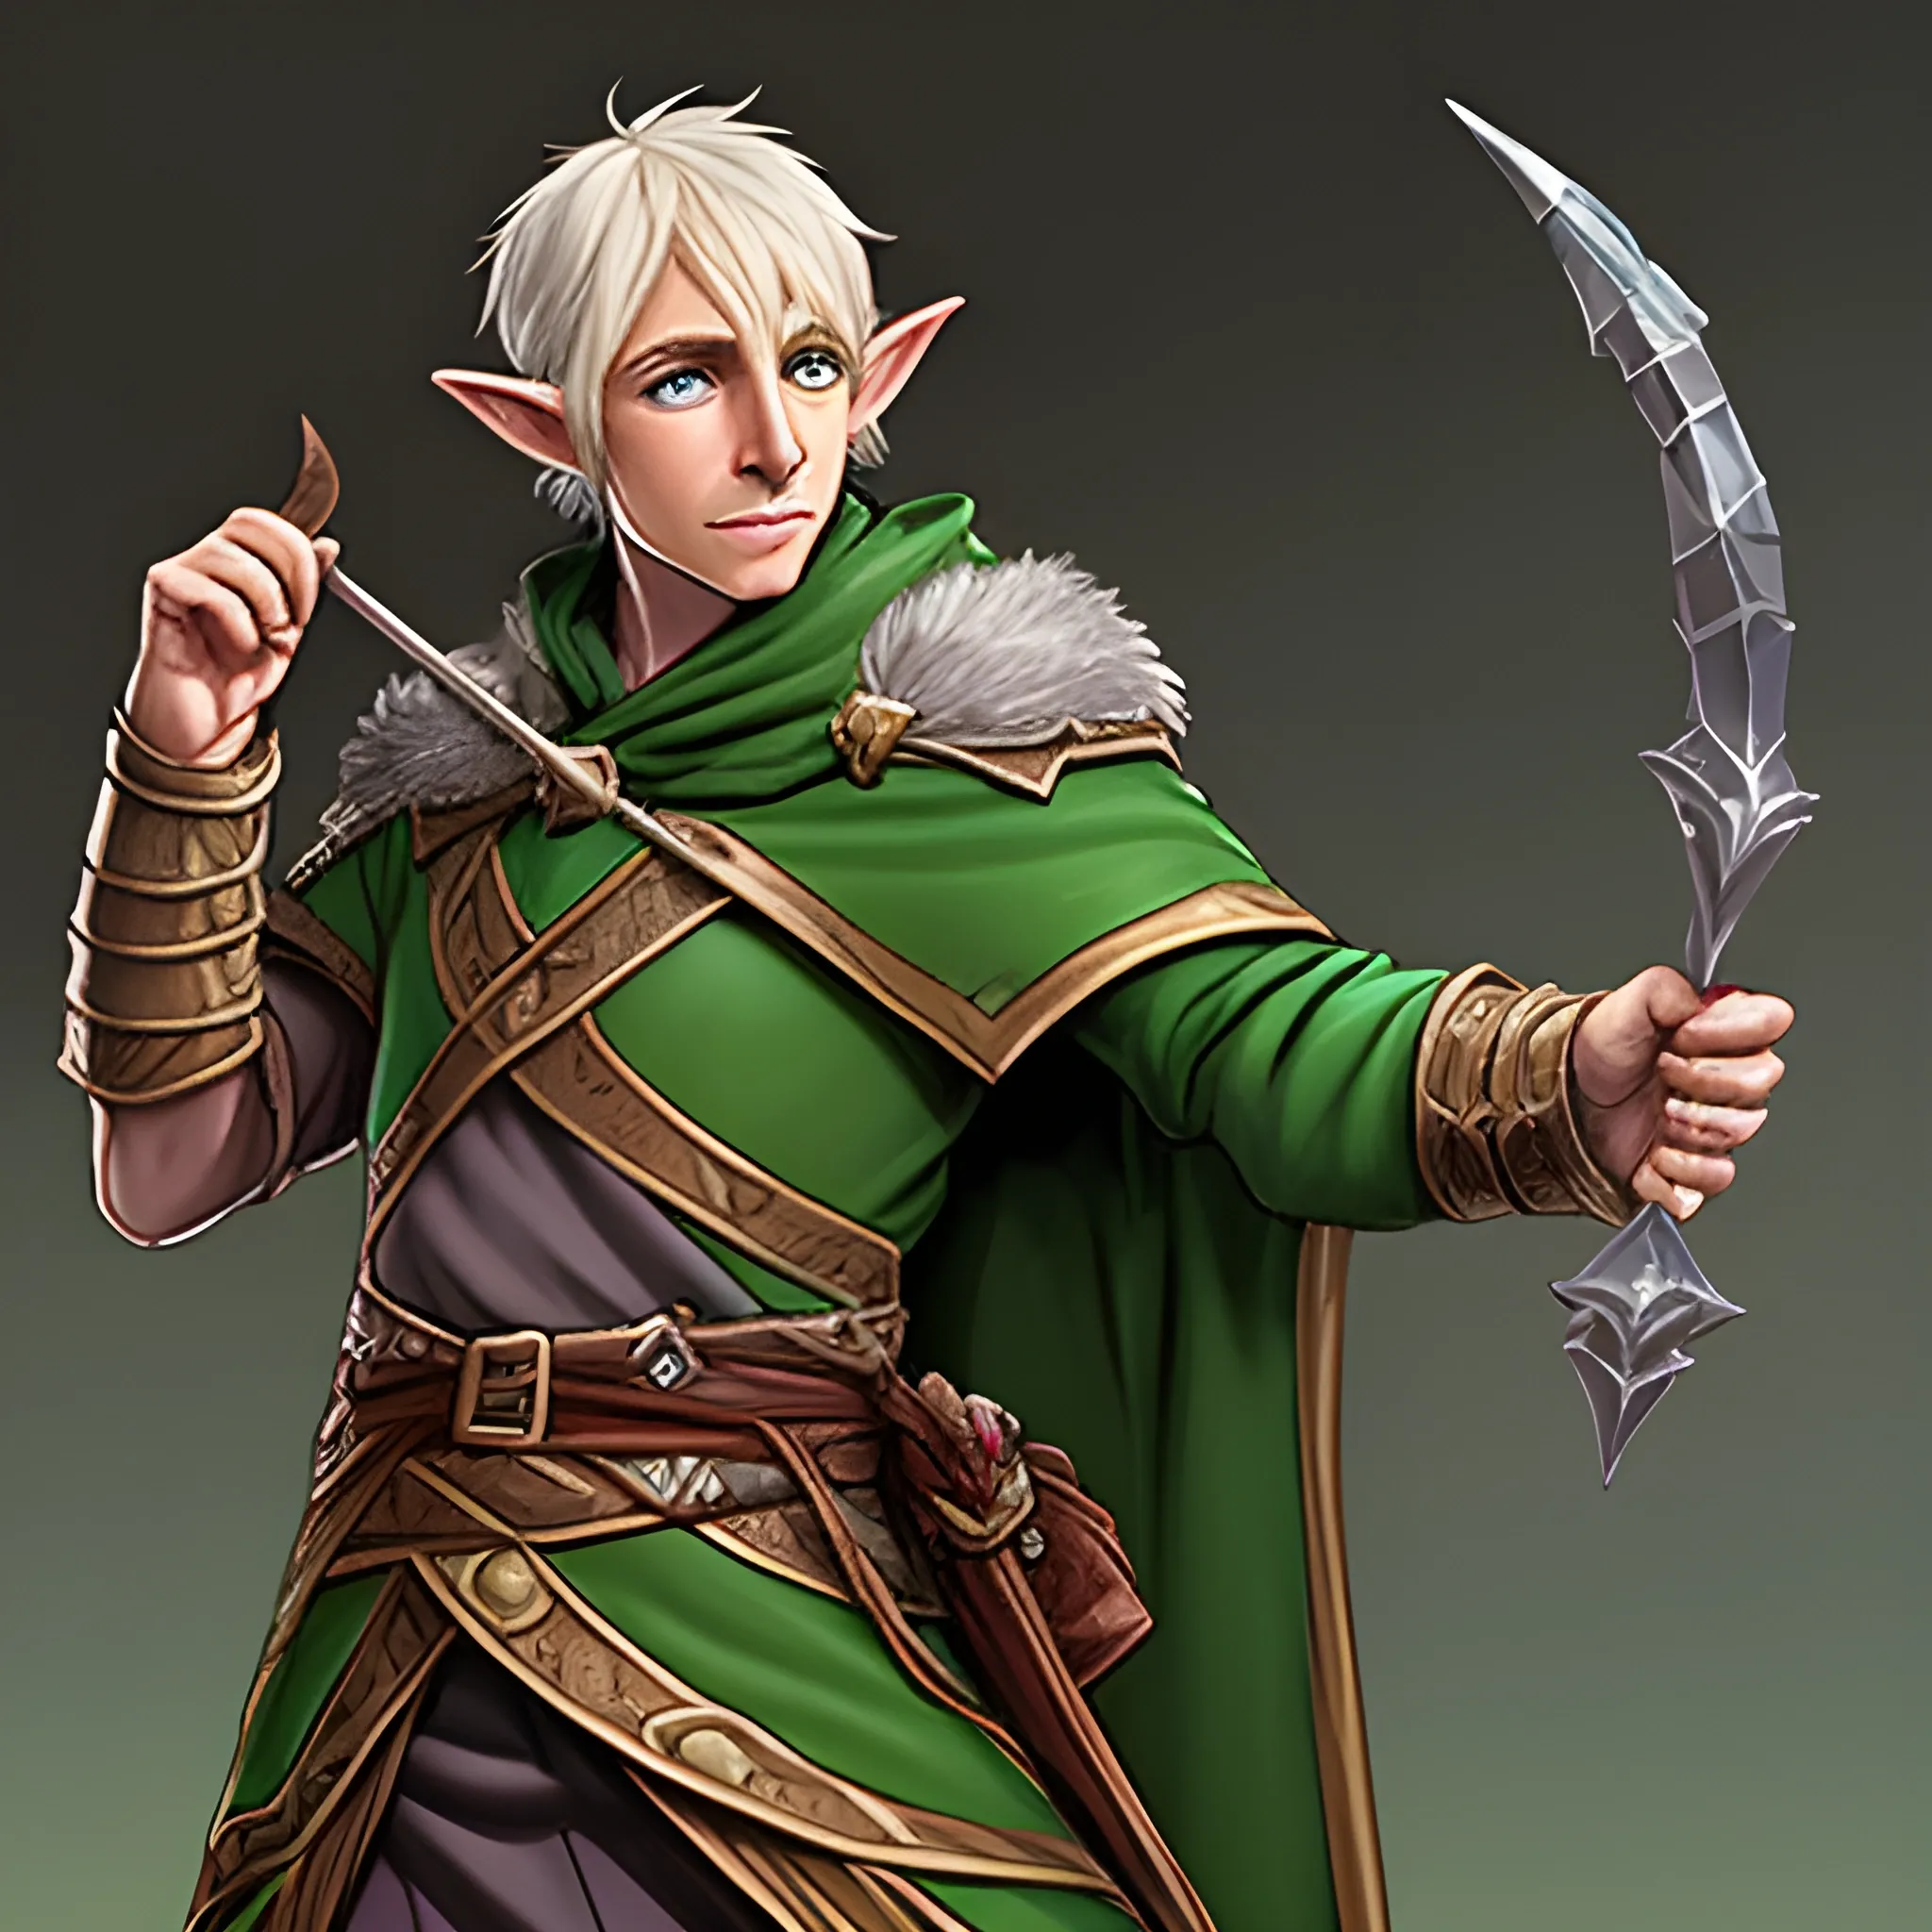 Create a dungeons and dragons character which is an Eladrin Elf male Wizard in all 4 seasons
